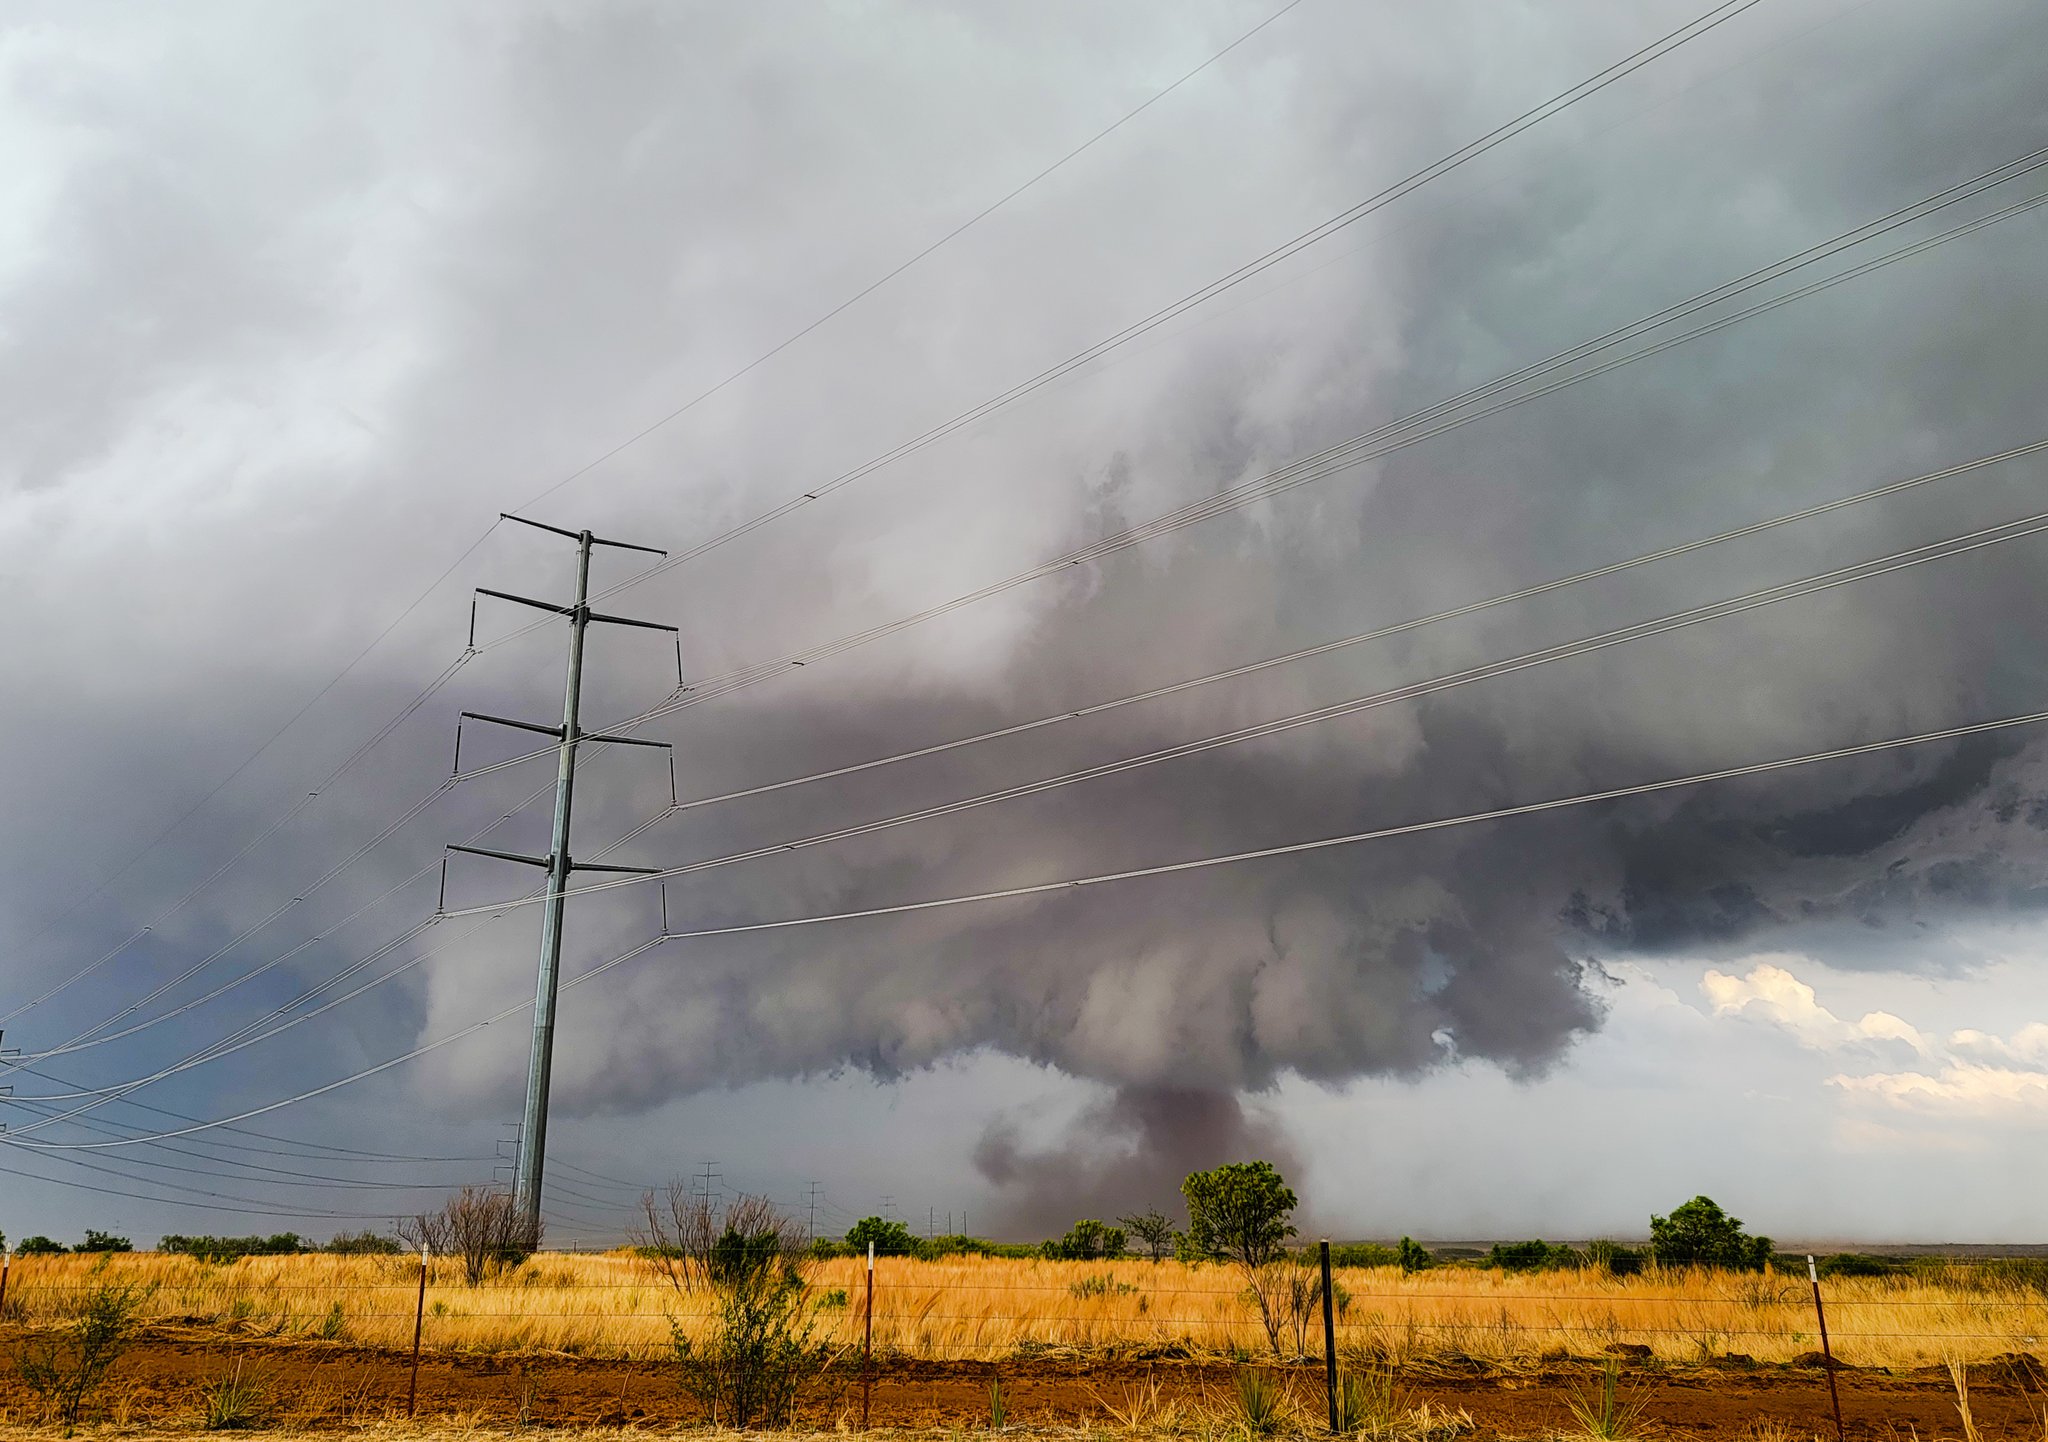 Tornadic storm near Grow, Texas, Wednesday evening (4 May 2022). The picture is courtesy of Melony Metz.